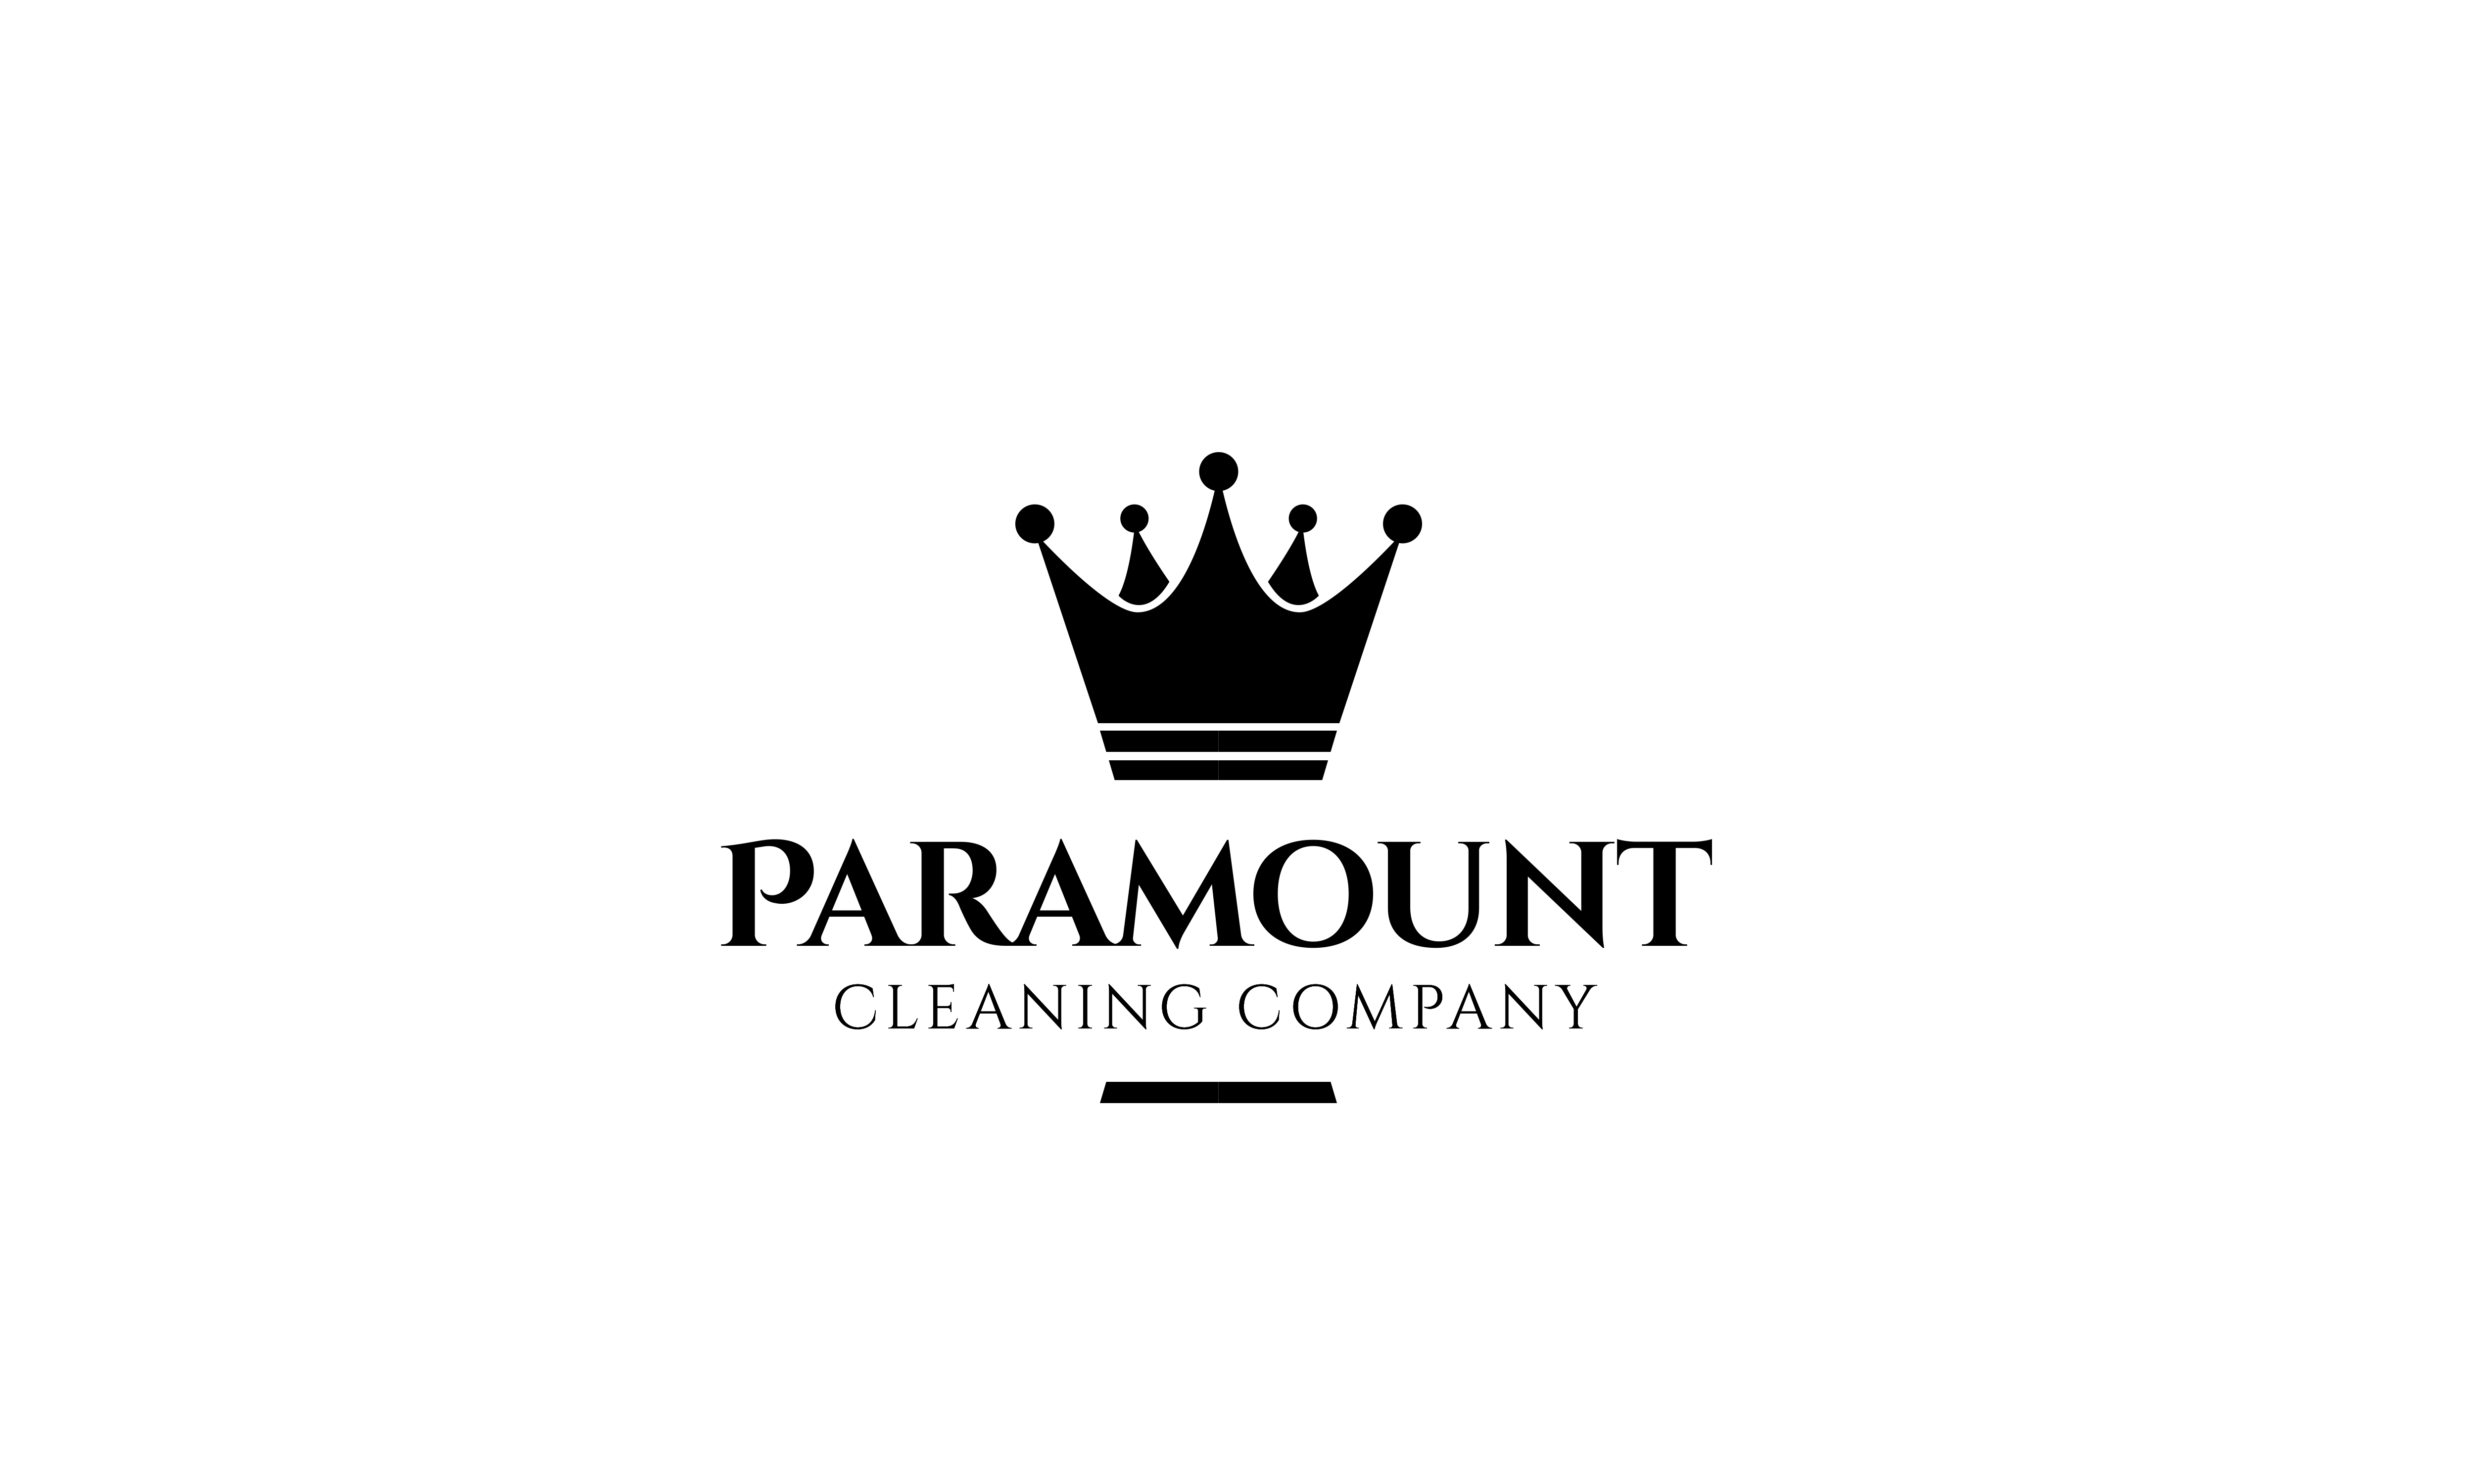 Logo of Paramount Cleaning Company Carpet And Upholstery Cleaners In Waterlooville, Hampshire